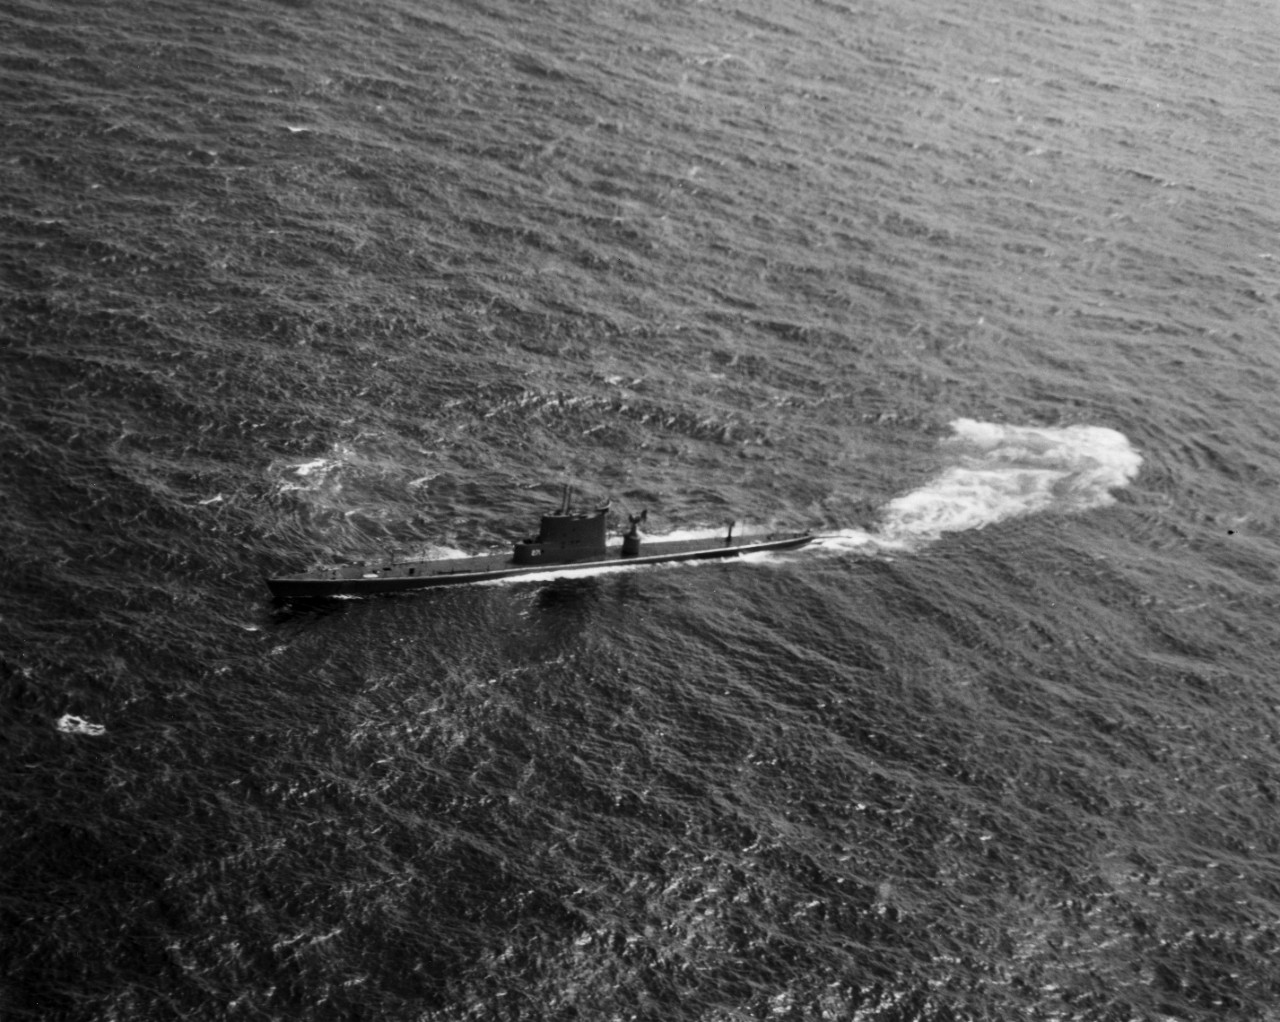 USS Ray (SSR-271) acting as a radar picket submarine for USS Randolph (CV-15) during operation "Italic Sky One" in the Mediterranean